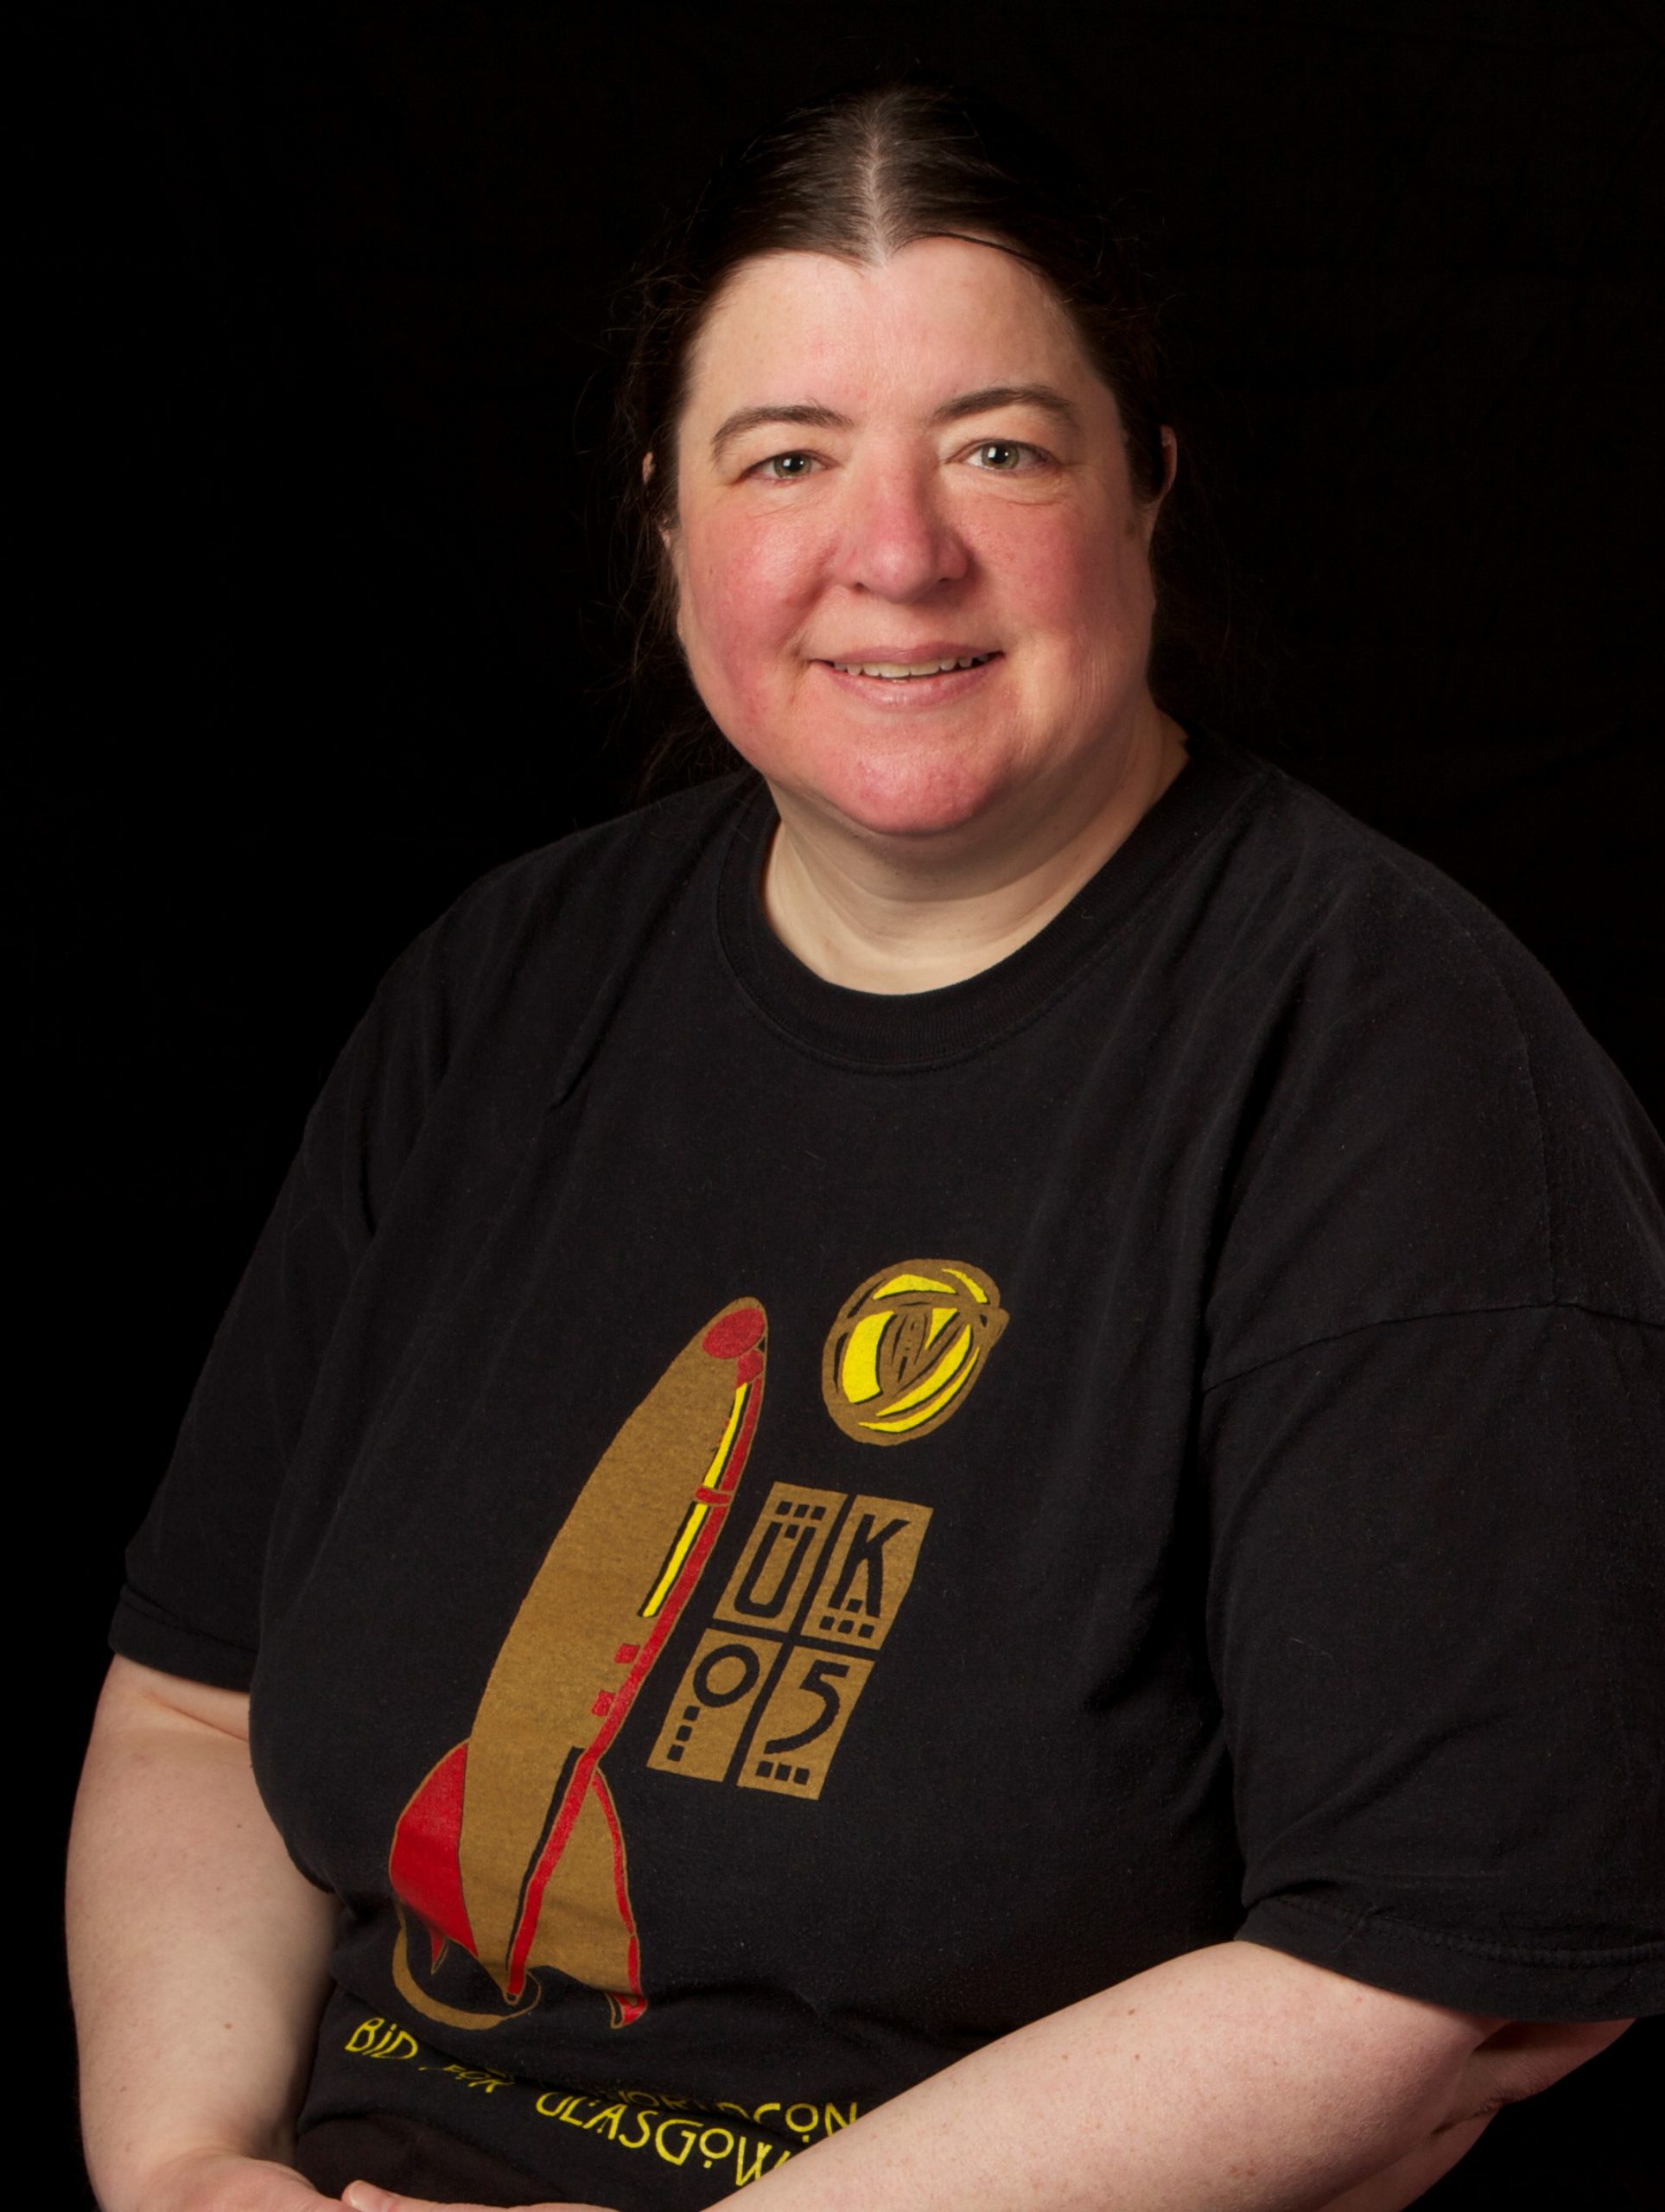 photo of a white woman with rosy cheeks and dark hair in a black t-shirt with a rocket logo on it, she is smiling